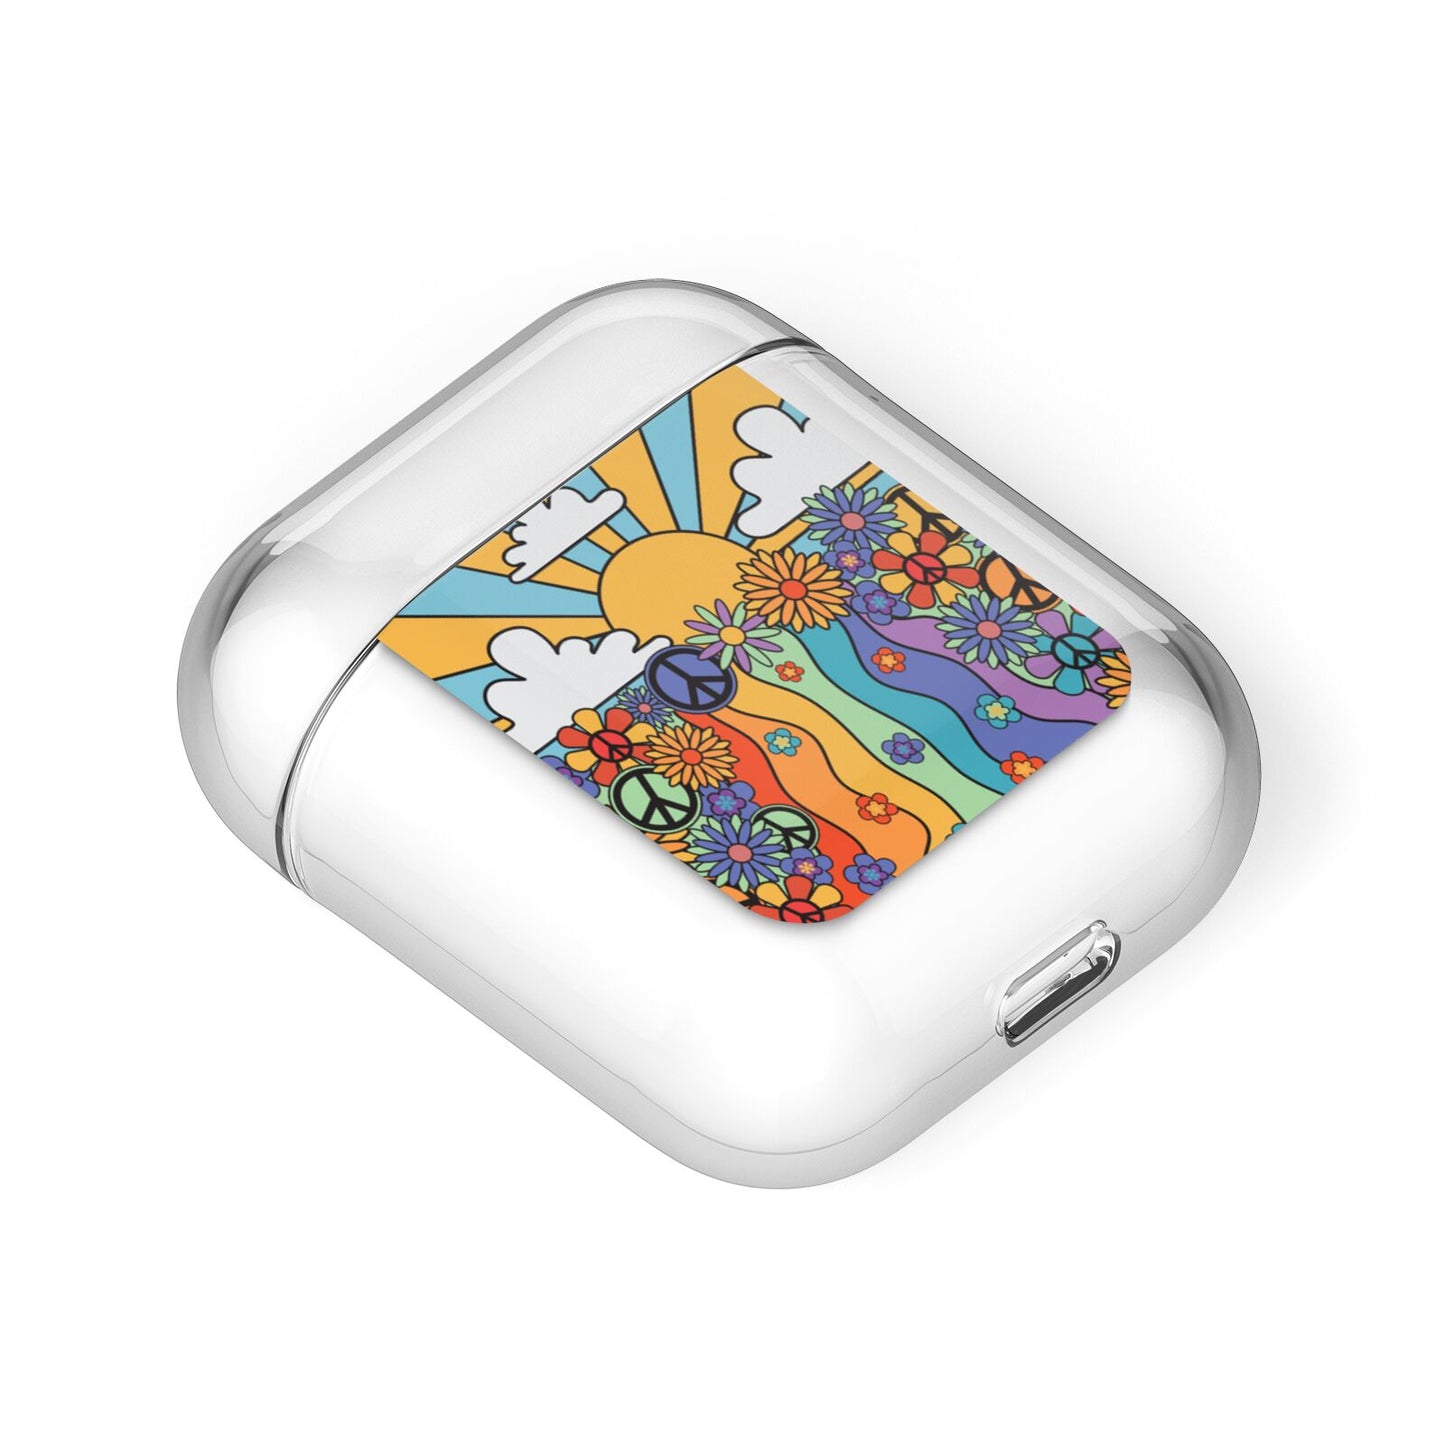 Seventies Groovy Retro AirPods Case Laid Flat